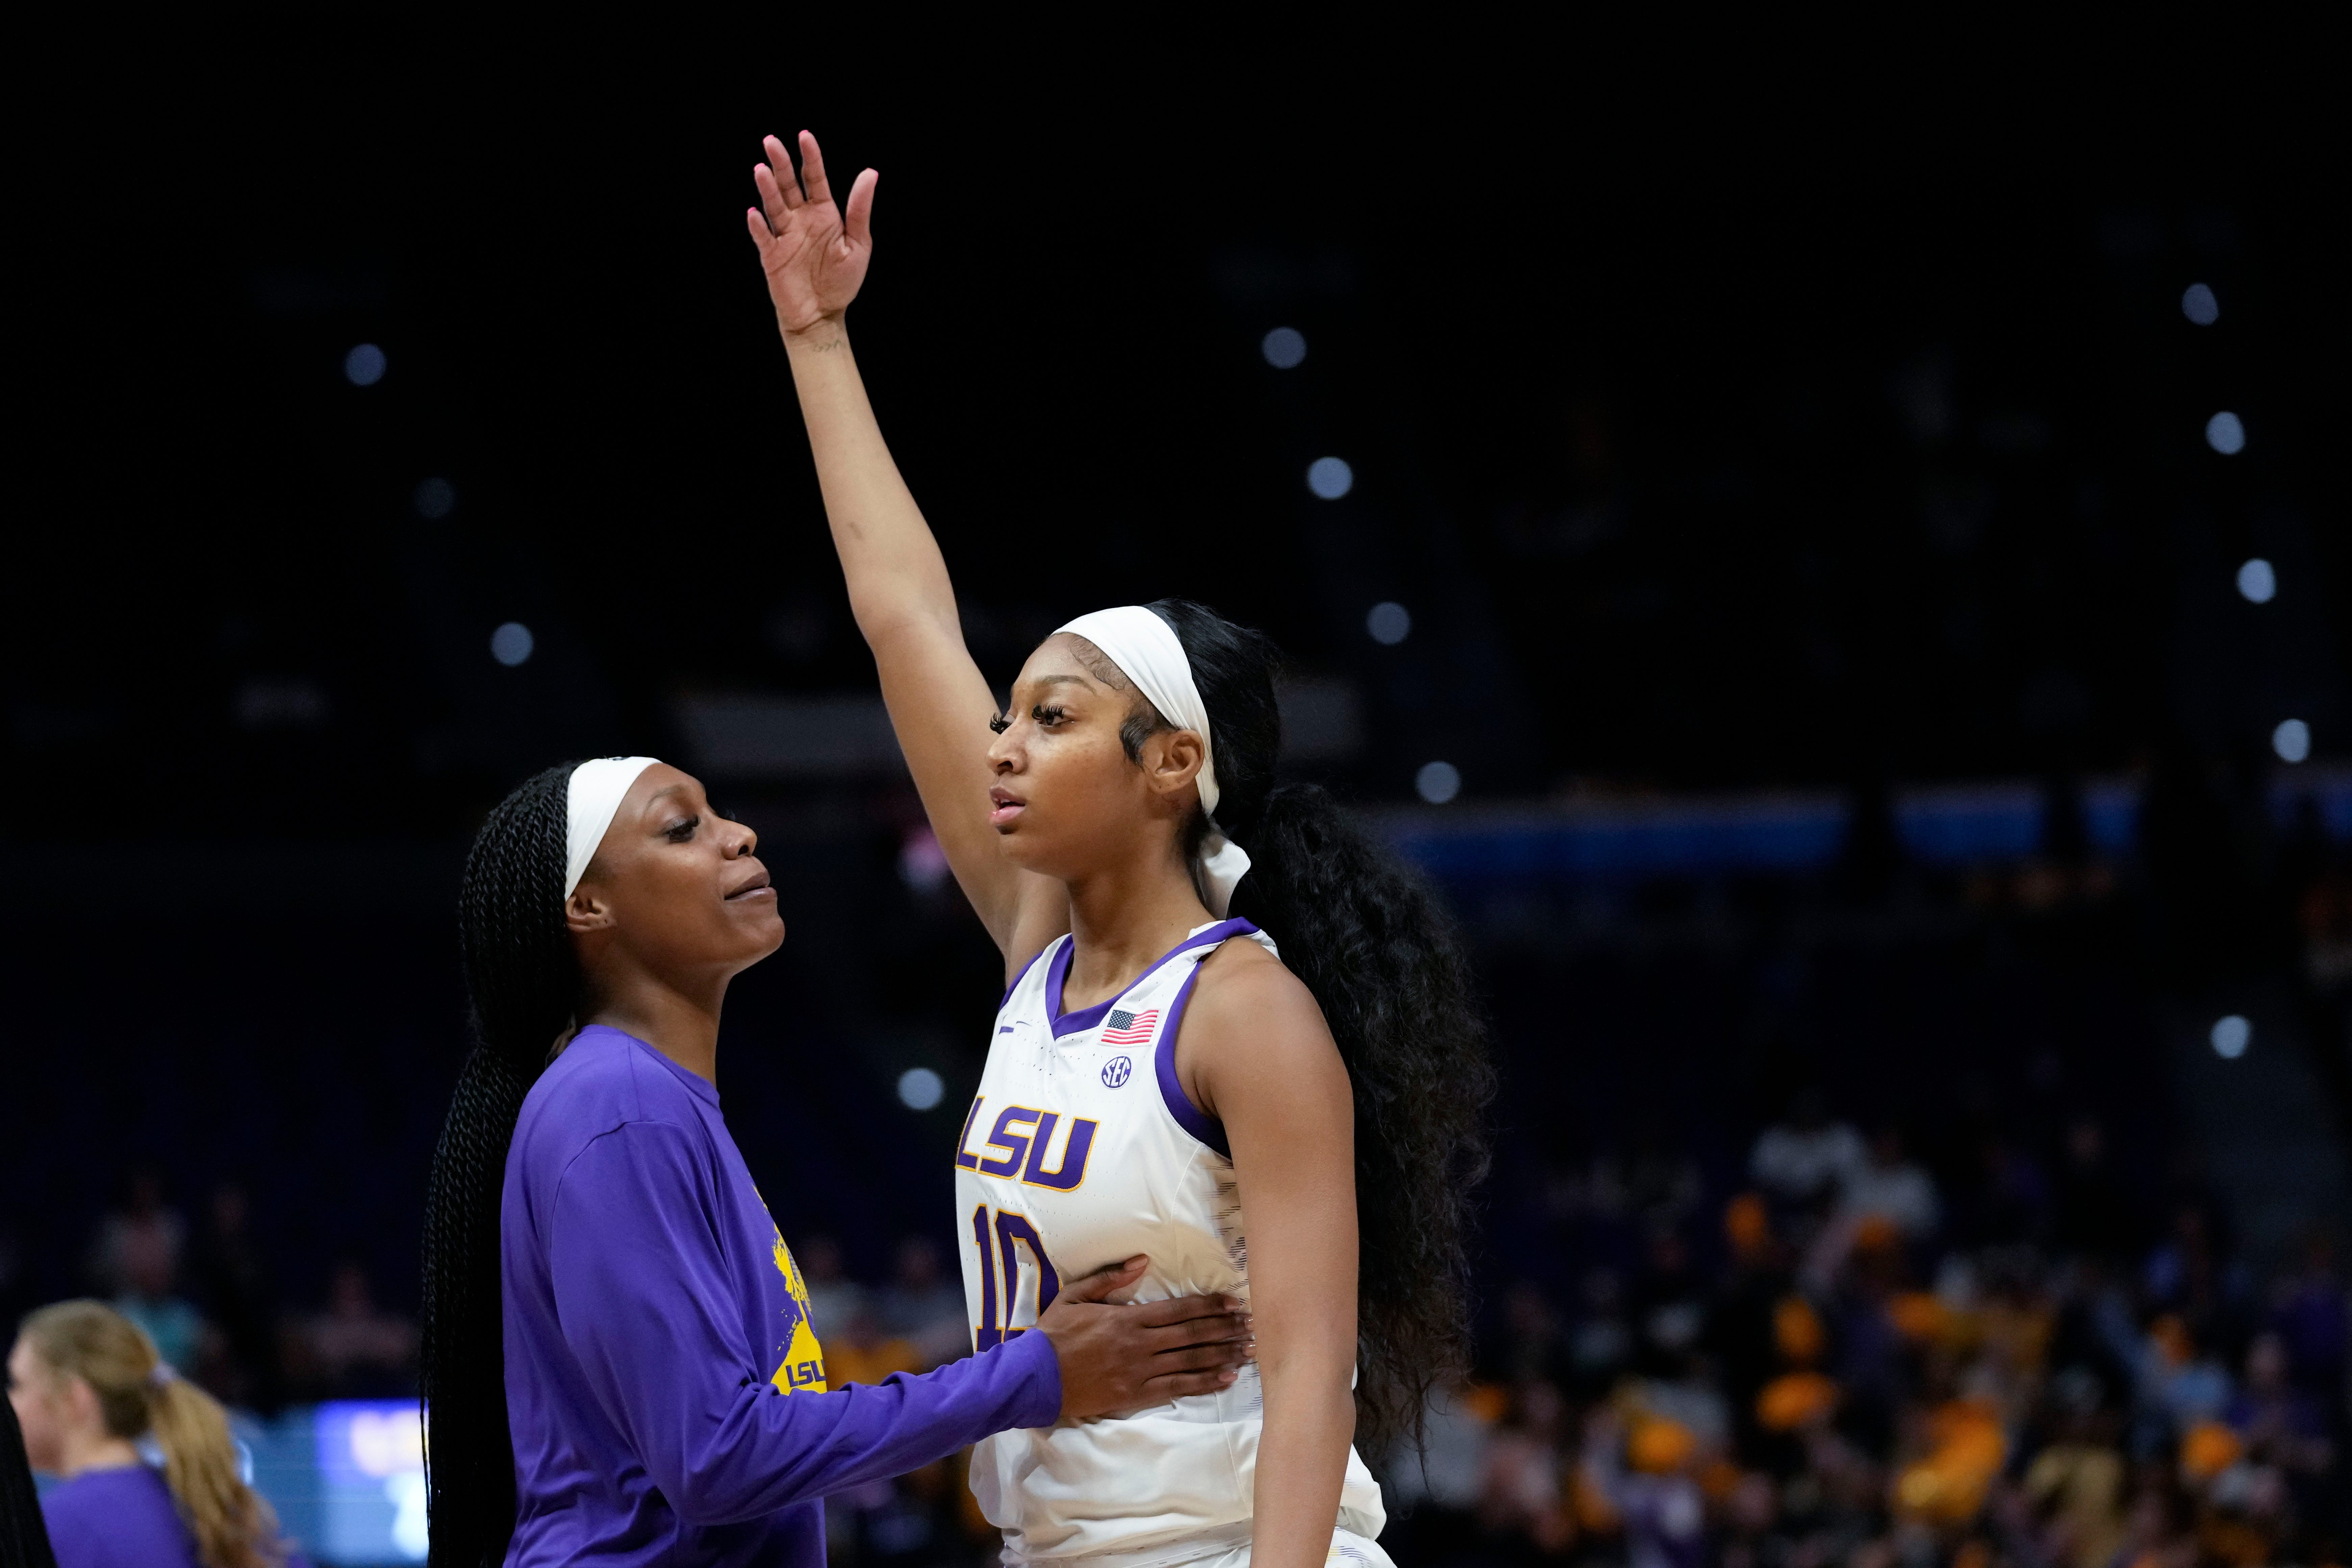 LSU forward Angel Reese (10) reacts during a timeout after scoring in the first half an NCAA college basketball game against Arkansas in Baton Rouge, La., Thursday, Jan. 19, 2023. (AP Photo/Gerald Herbert)